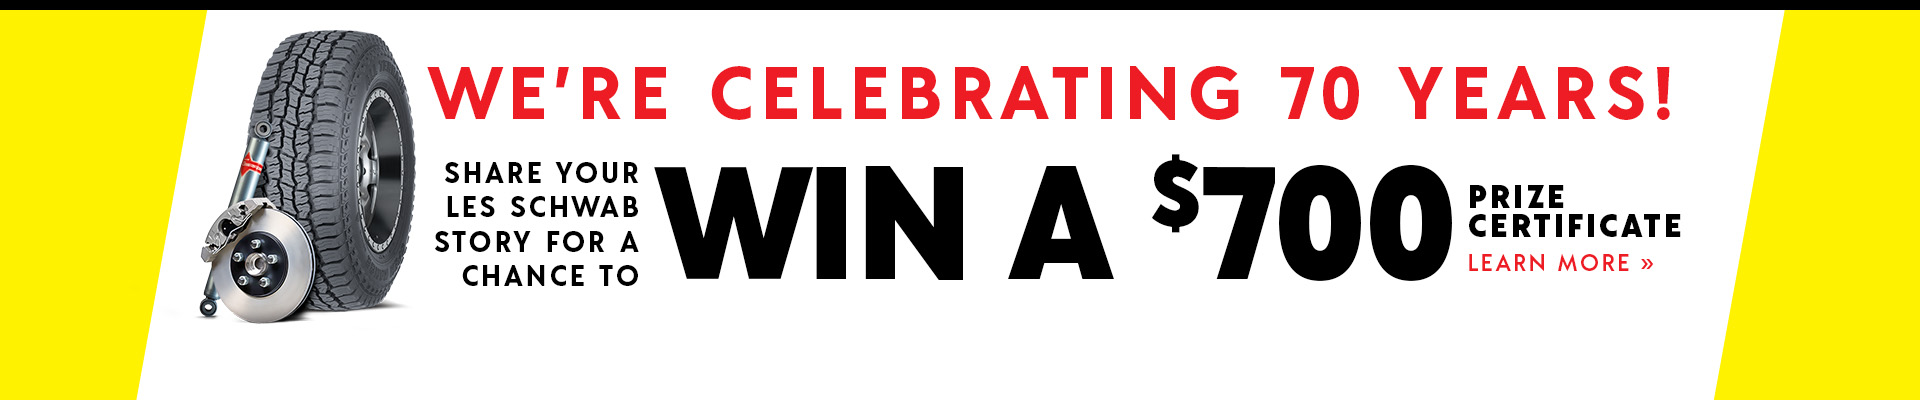 70th Anniversary Sweepstakes